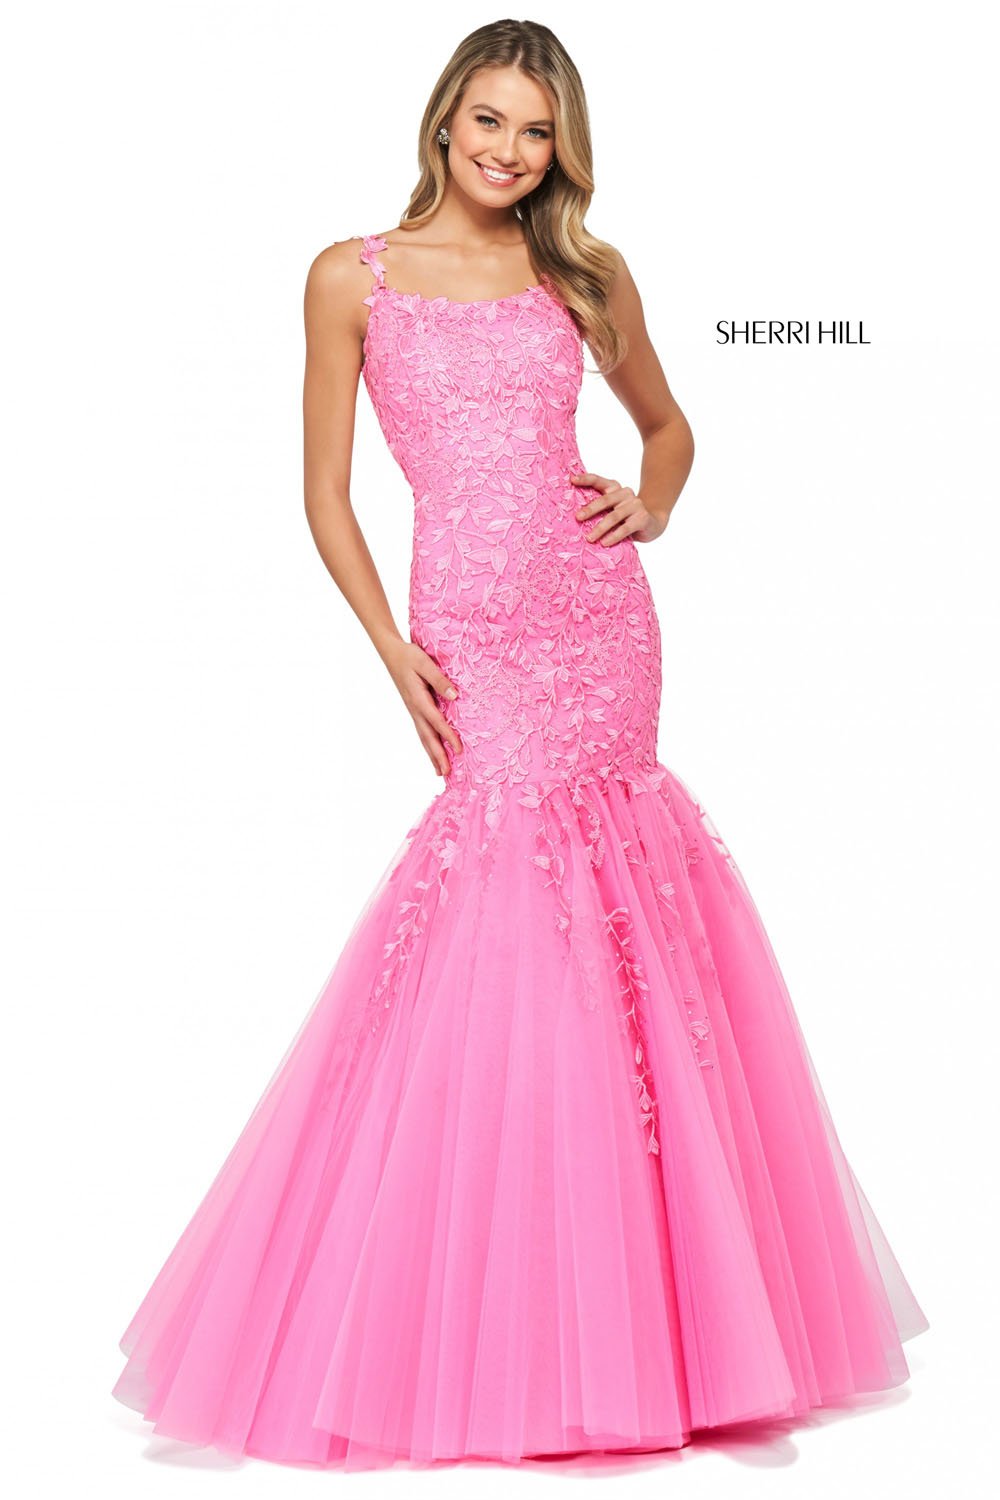 Sherri Hill 53826 dress images in these colors: Blush, Lilac, Coral, Ivory Nude, Light Blue, Yellow, Bright Pink, Gold, Black, Red.